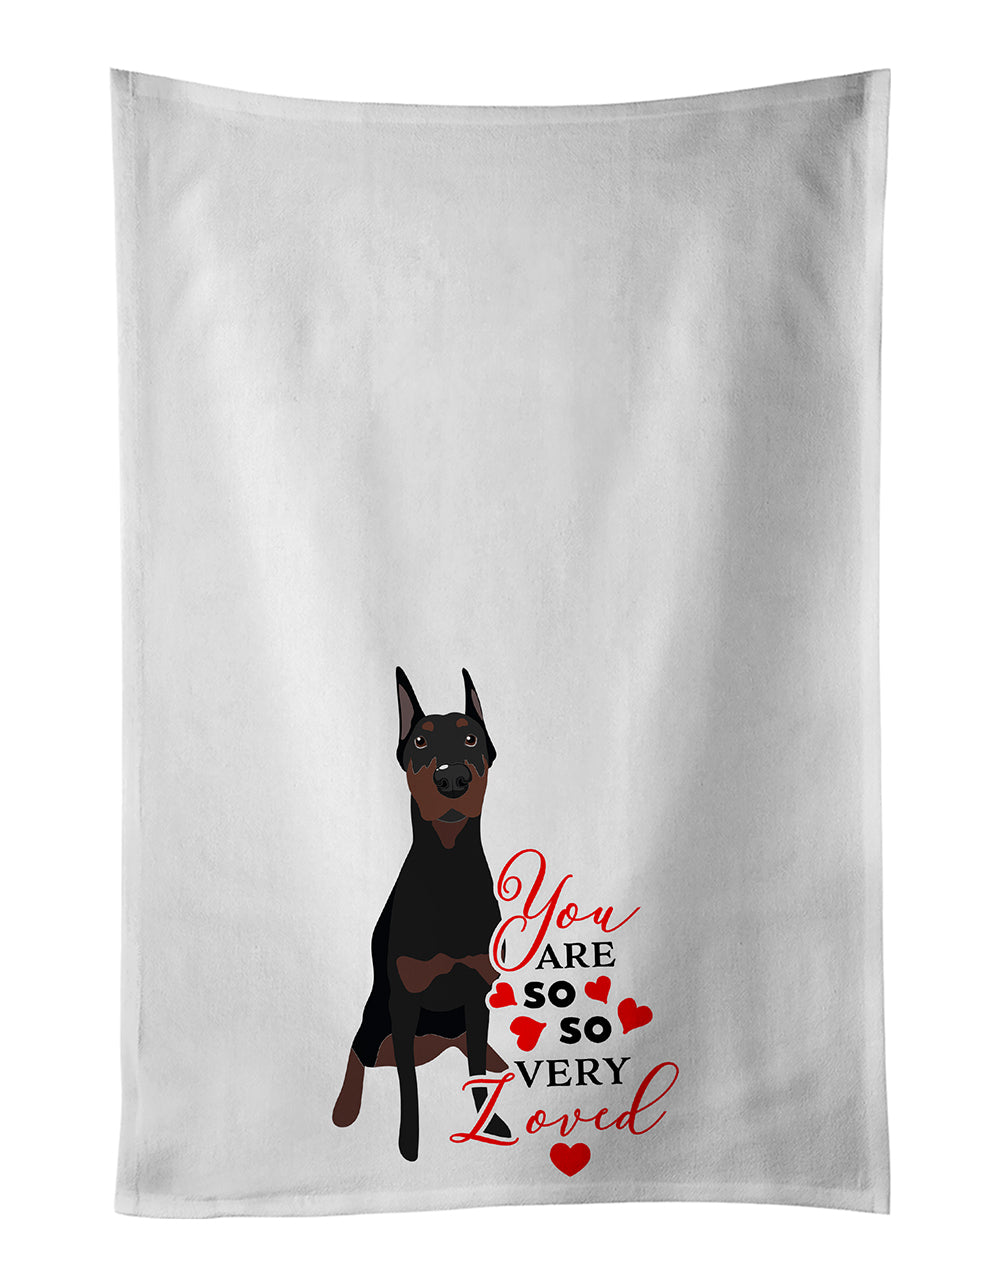 Buy this Doberman Pinscher Black Cropped Ears so Loved White Kitchen Towel Set of 2